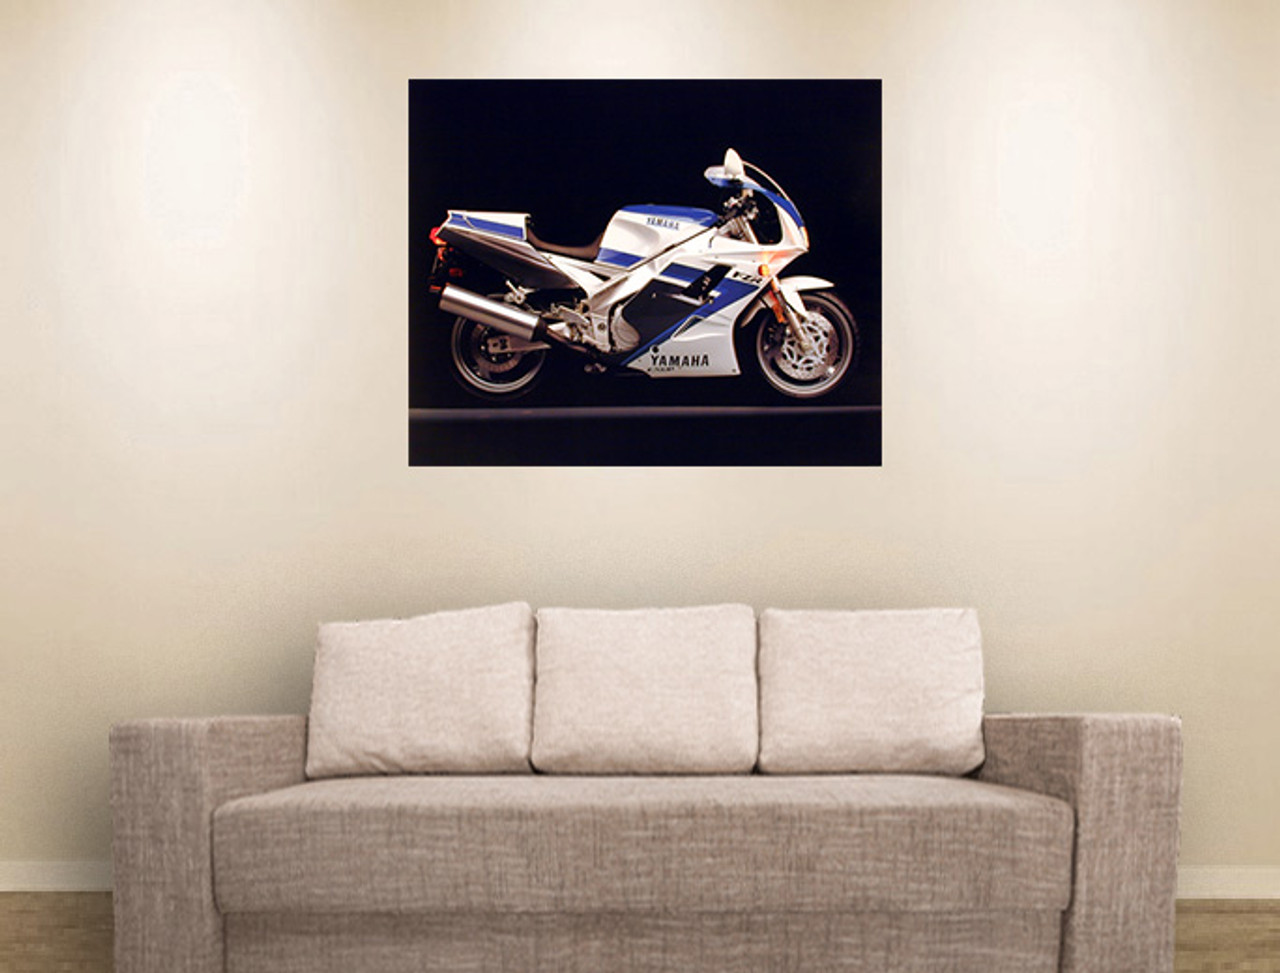 Yamaha R6 Expensive Motorcycle Speed Bike Wall Art Home Decor - POSTER  20x30